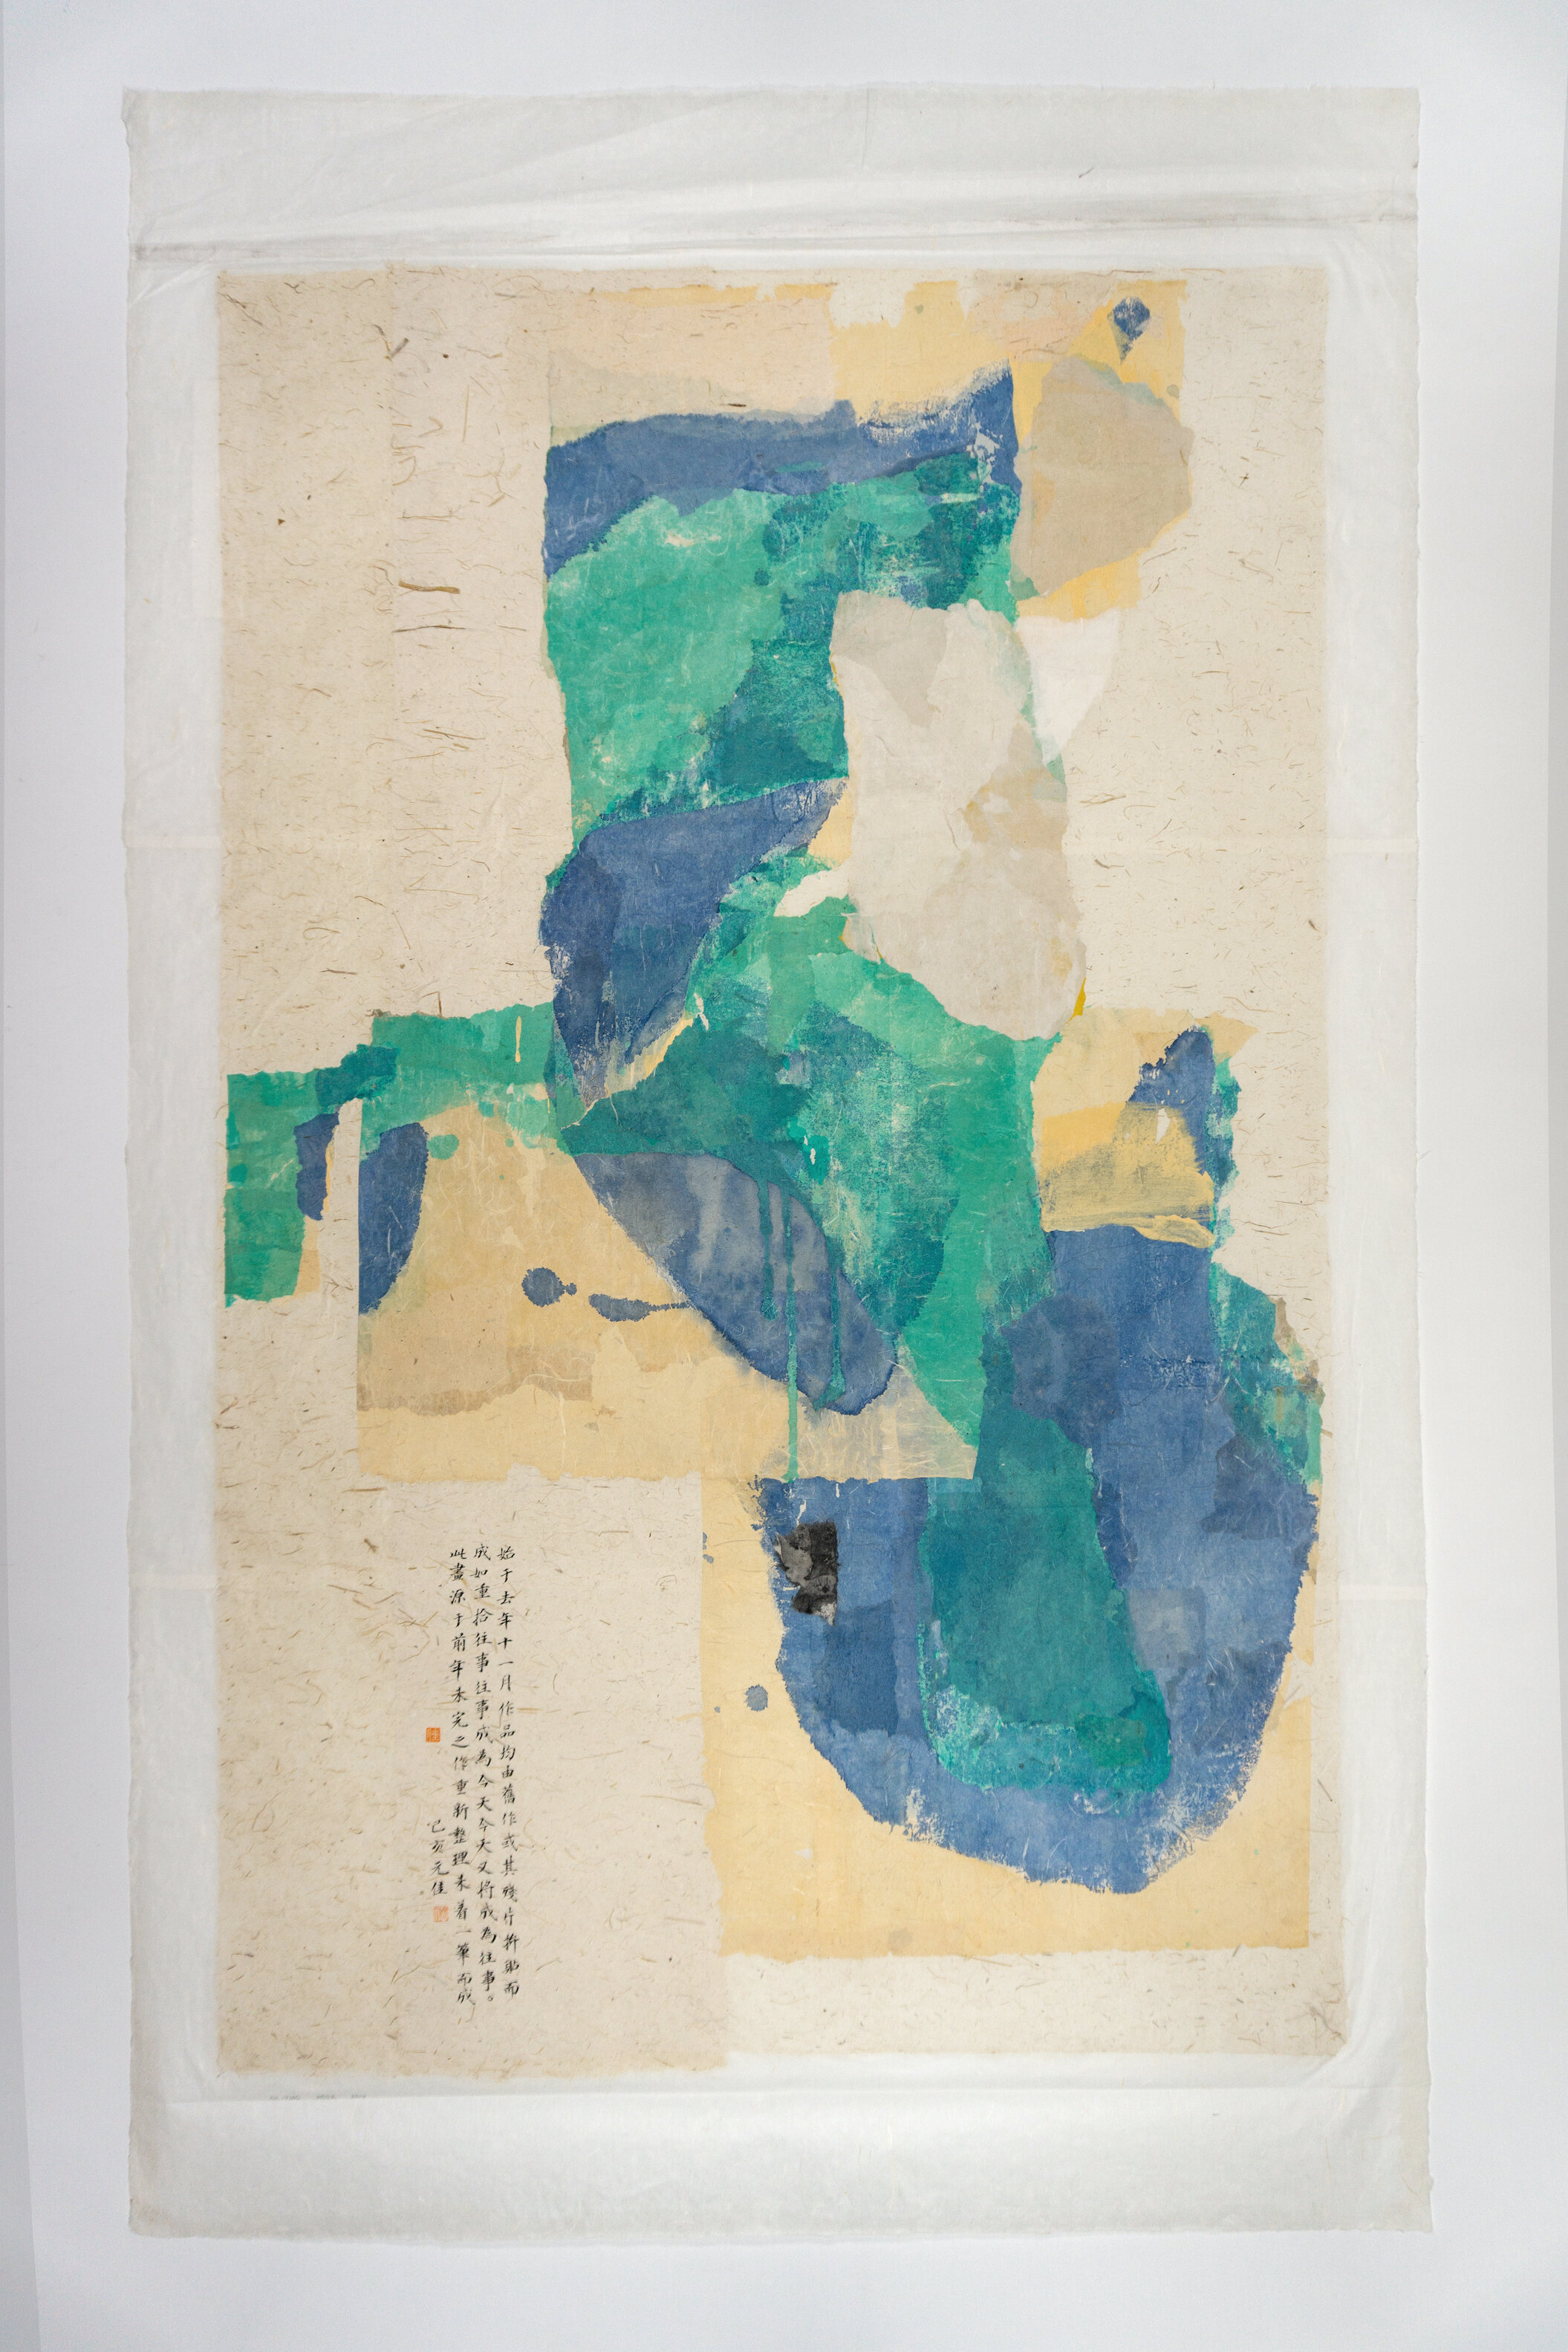  Wei Jia,  No. 19246 , 2021. Gouache, Ink and Xuan Paper Collage on Paper, 68 7/8 x 42 inches. ©Wei Jia, courtesy of Fou Gallery and Chambers Fine Art 